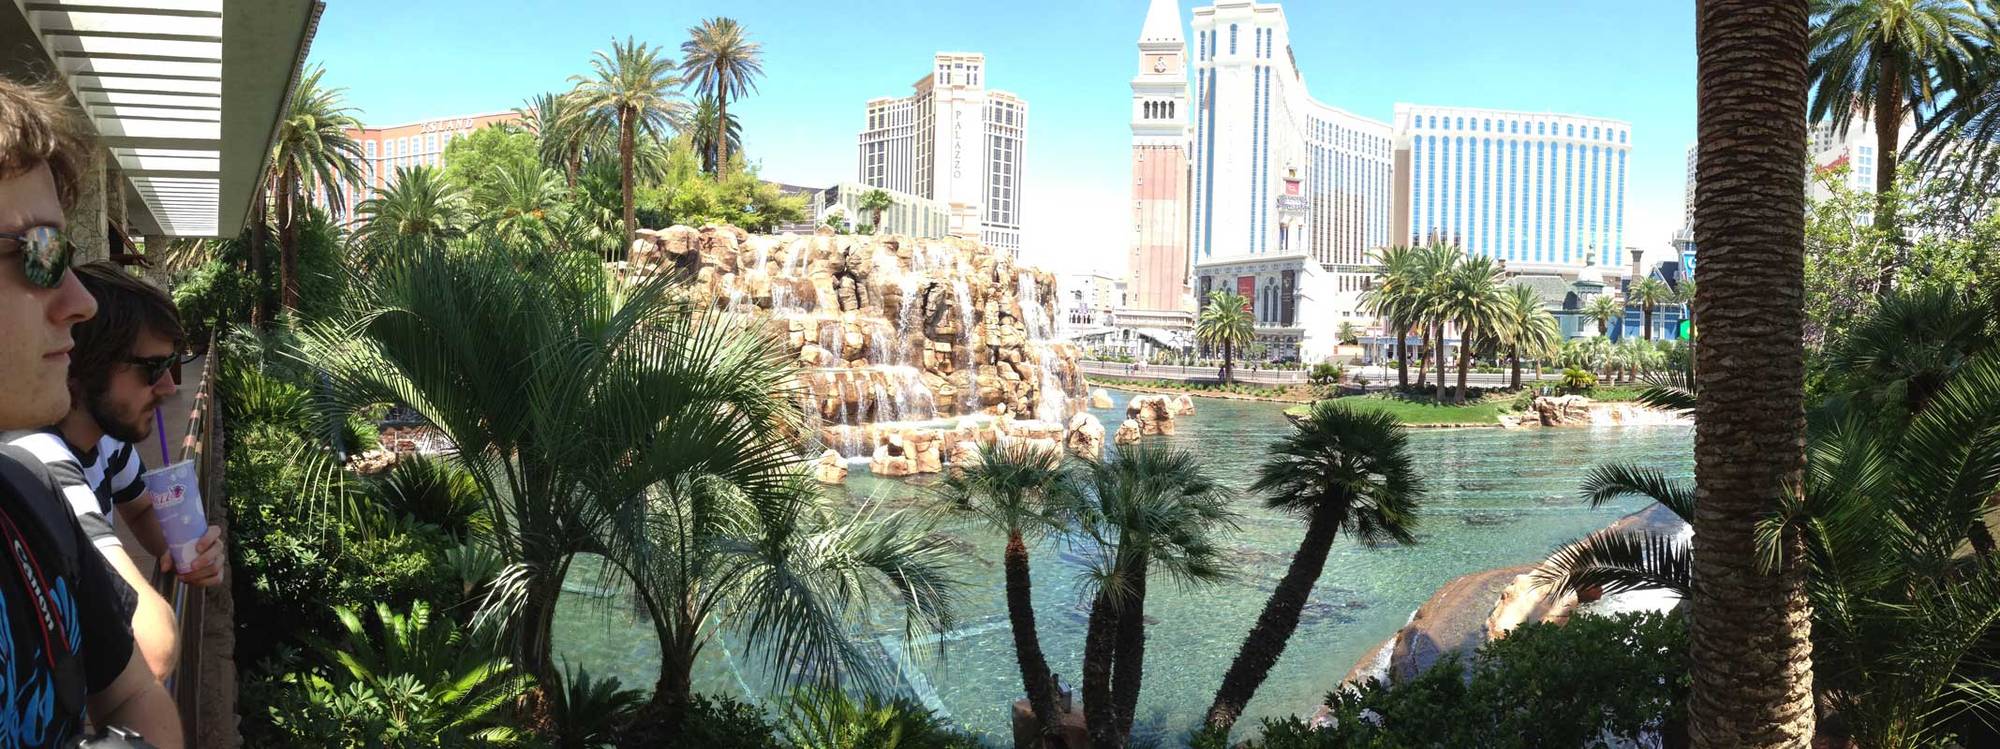 Panorama of the Mirage